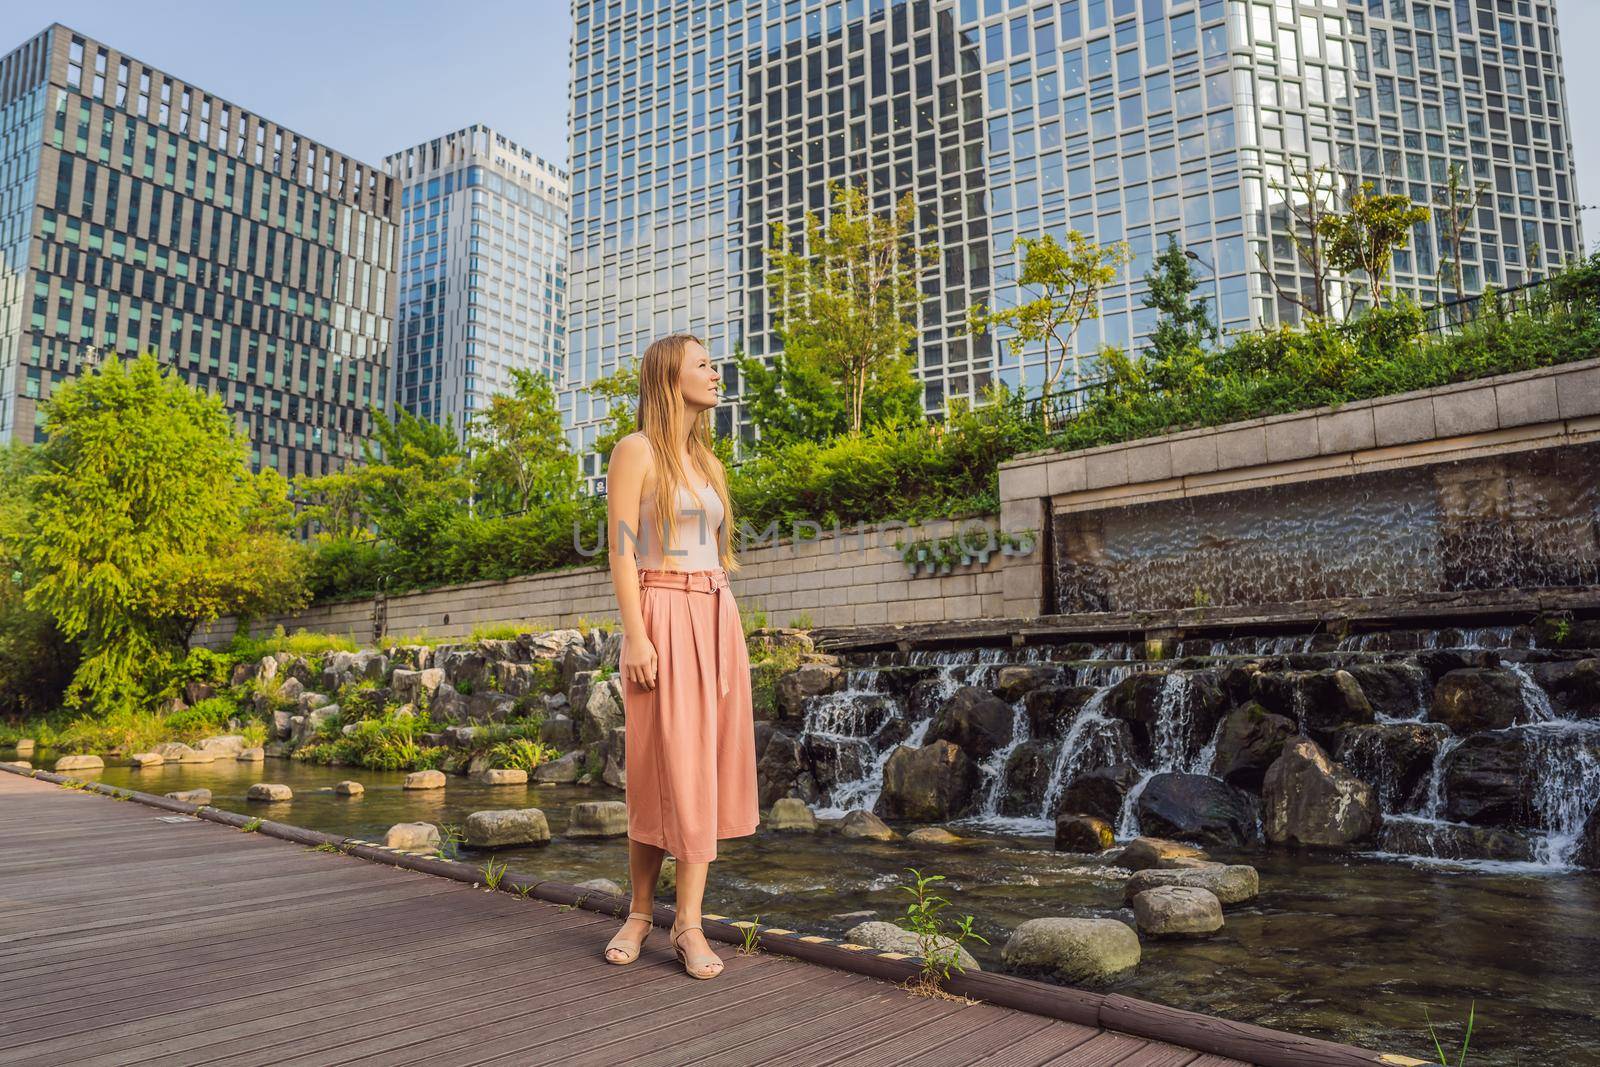 Young woman tourist in Cheonggyecheon stream in Seoul, Korea. Cheonggyecheon stream is the result of a massive urban renewal project. Travel to Korea Concept by galitskaya